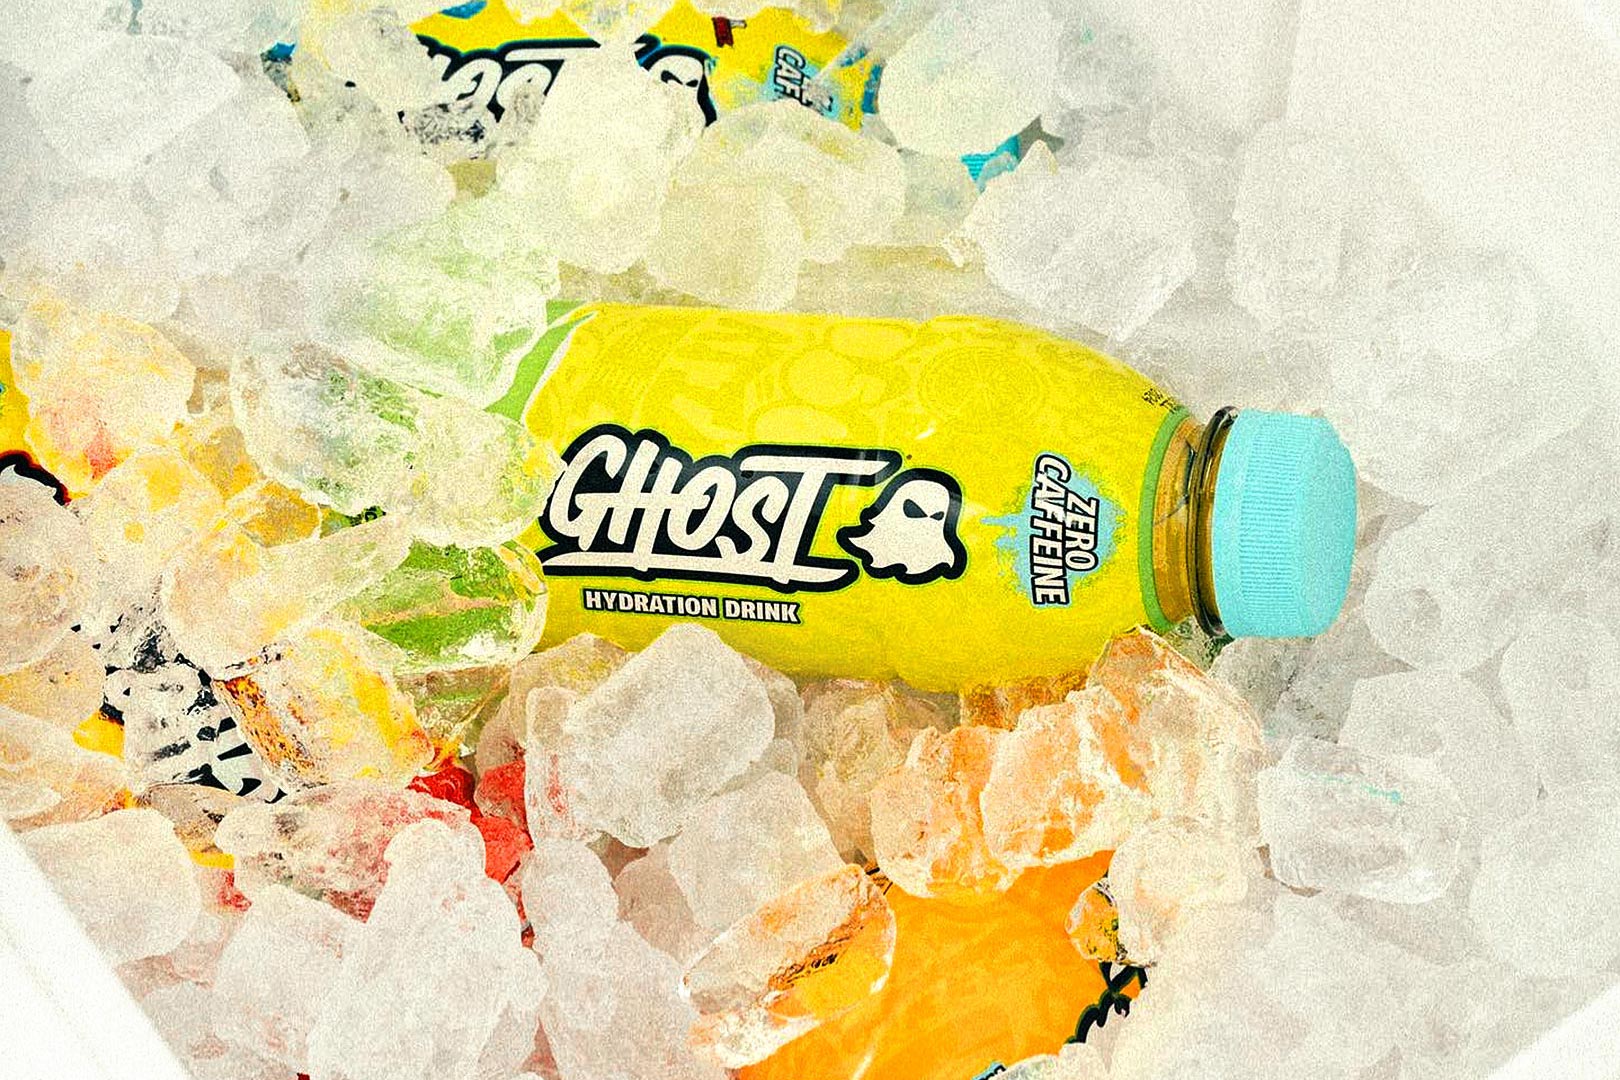 GHOST Hydration RTD Announced on PricePlow: Here's What We Know